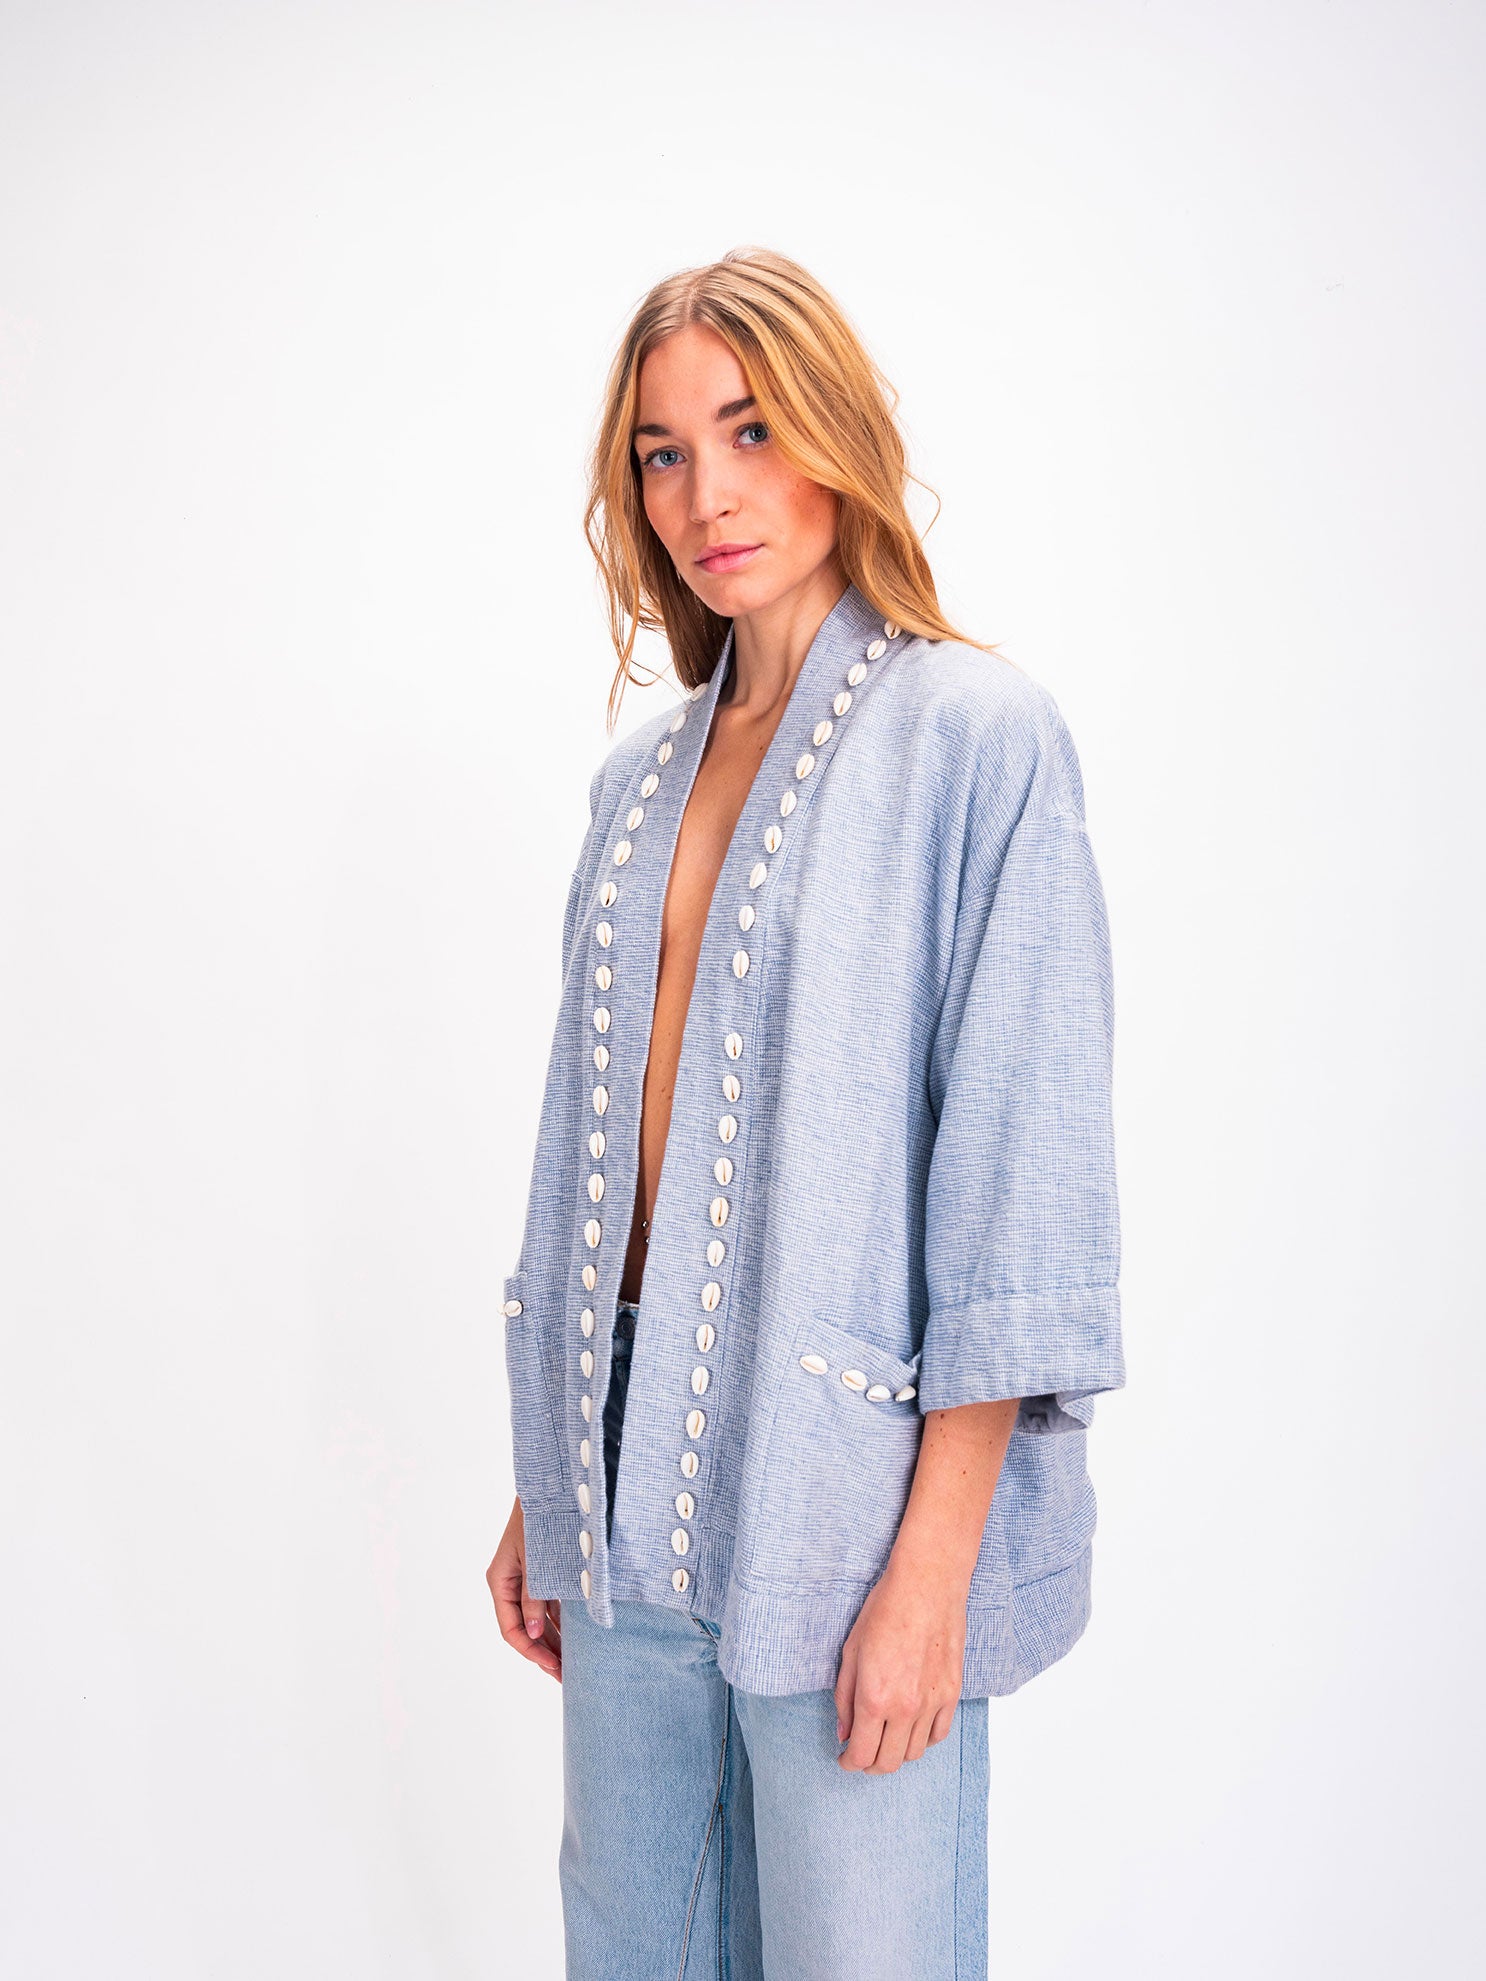 Sky Blue Cotton Jacket with Cowrie Shells